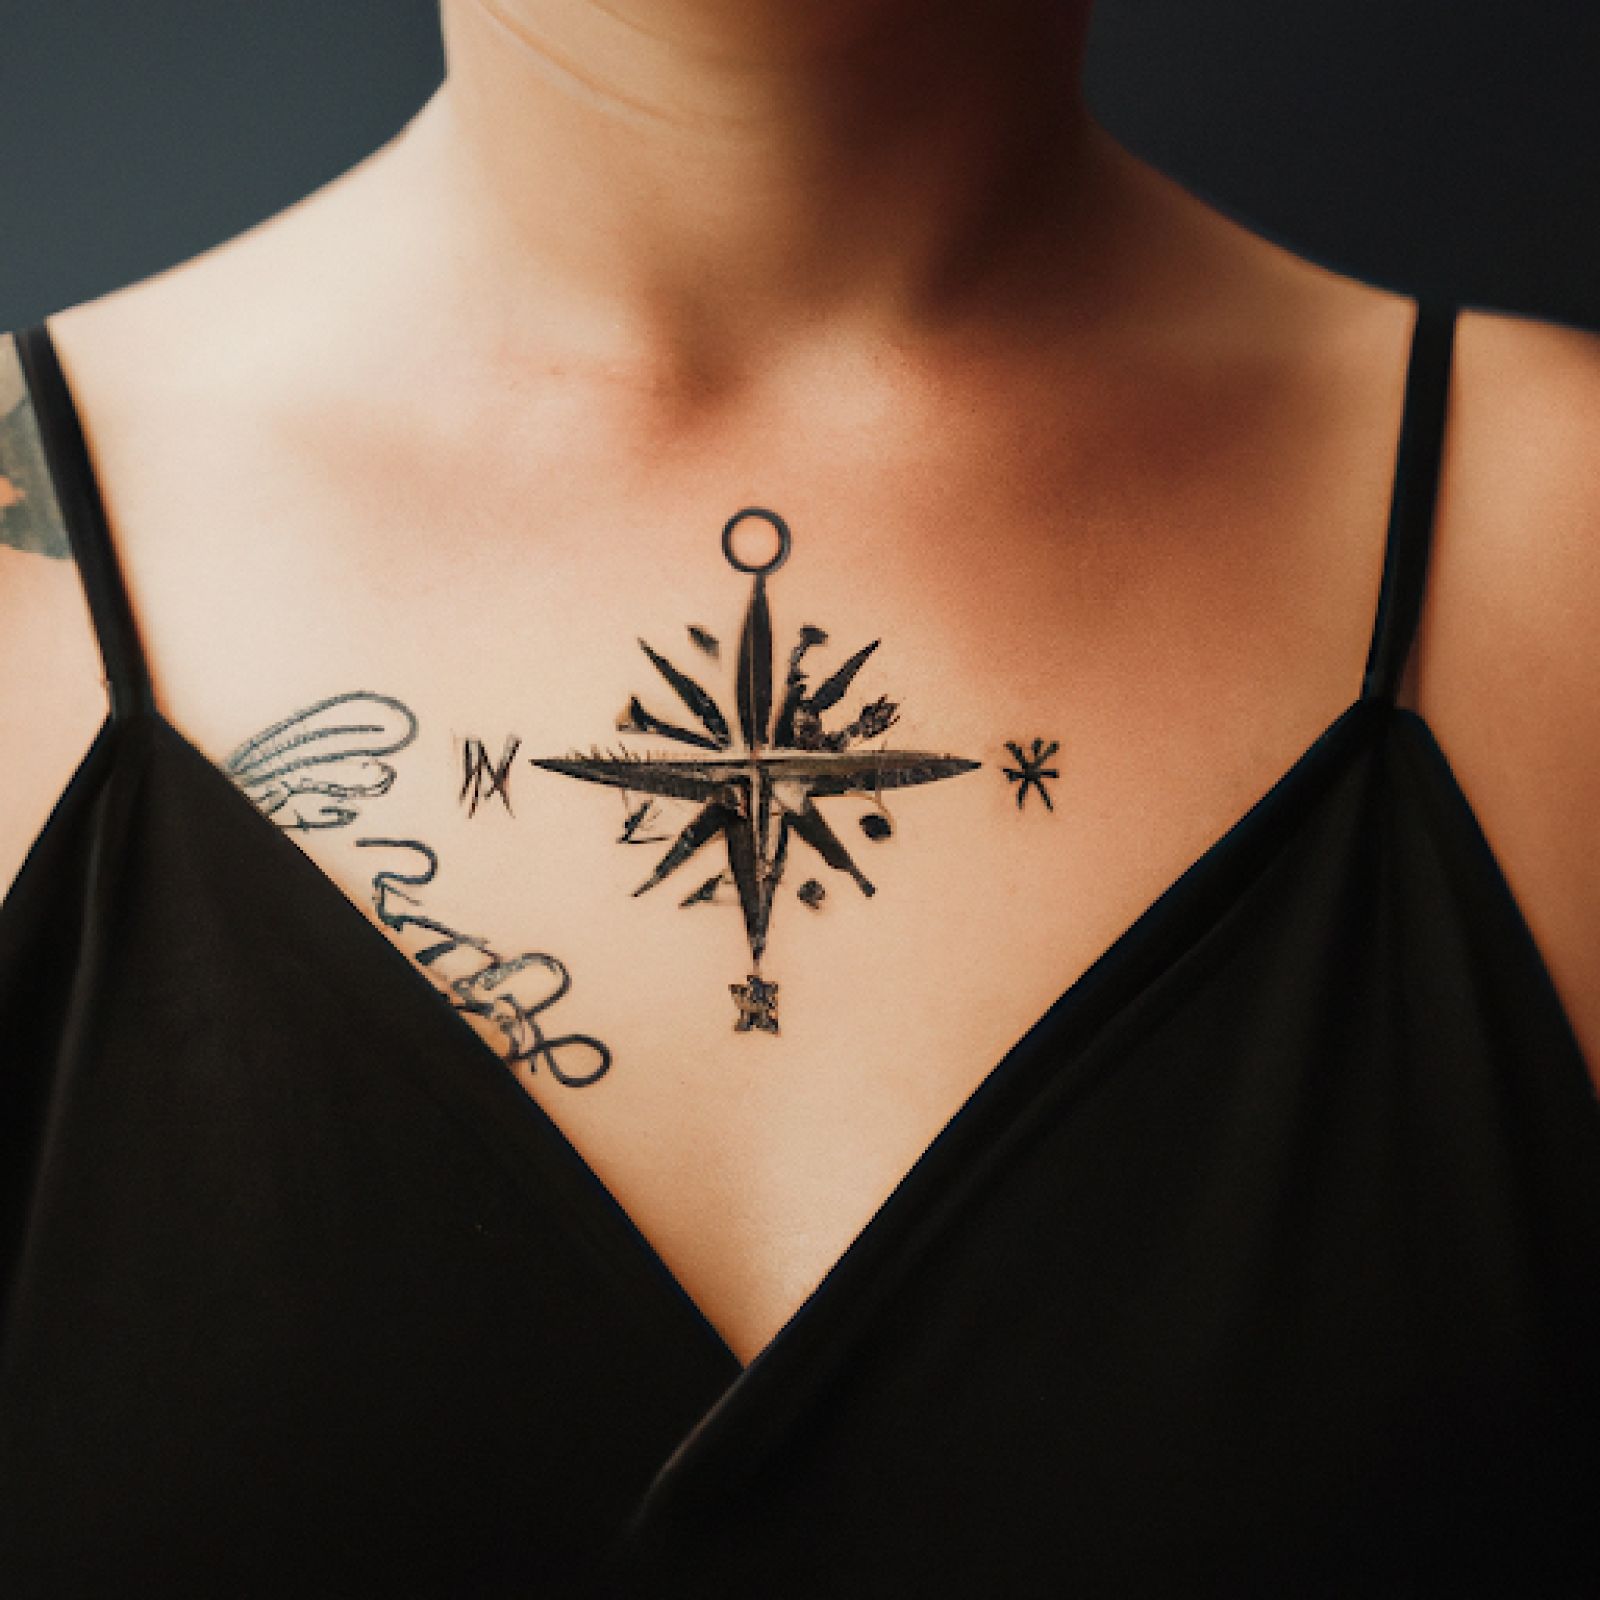 Compass tattoo on sternum for women